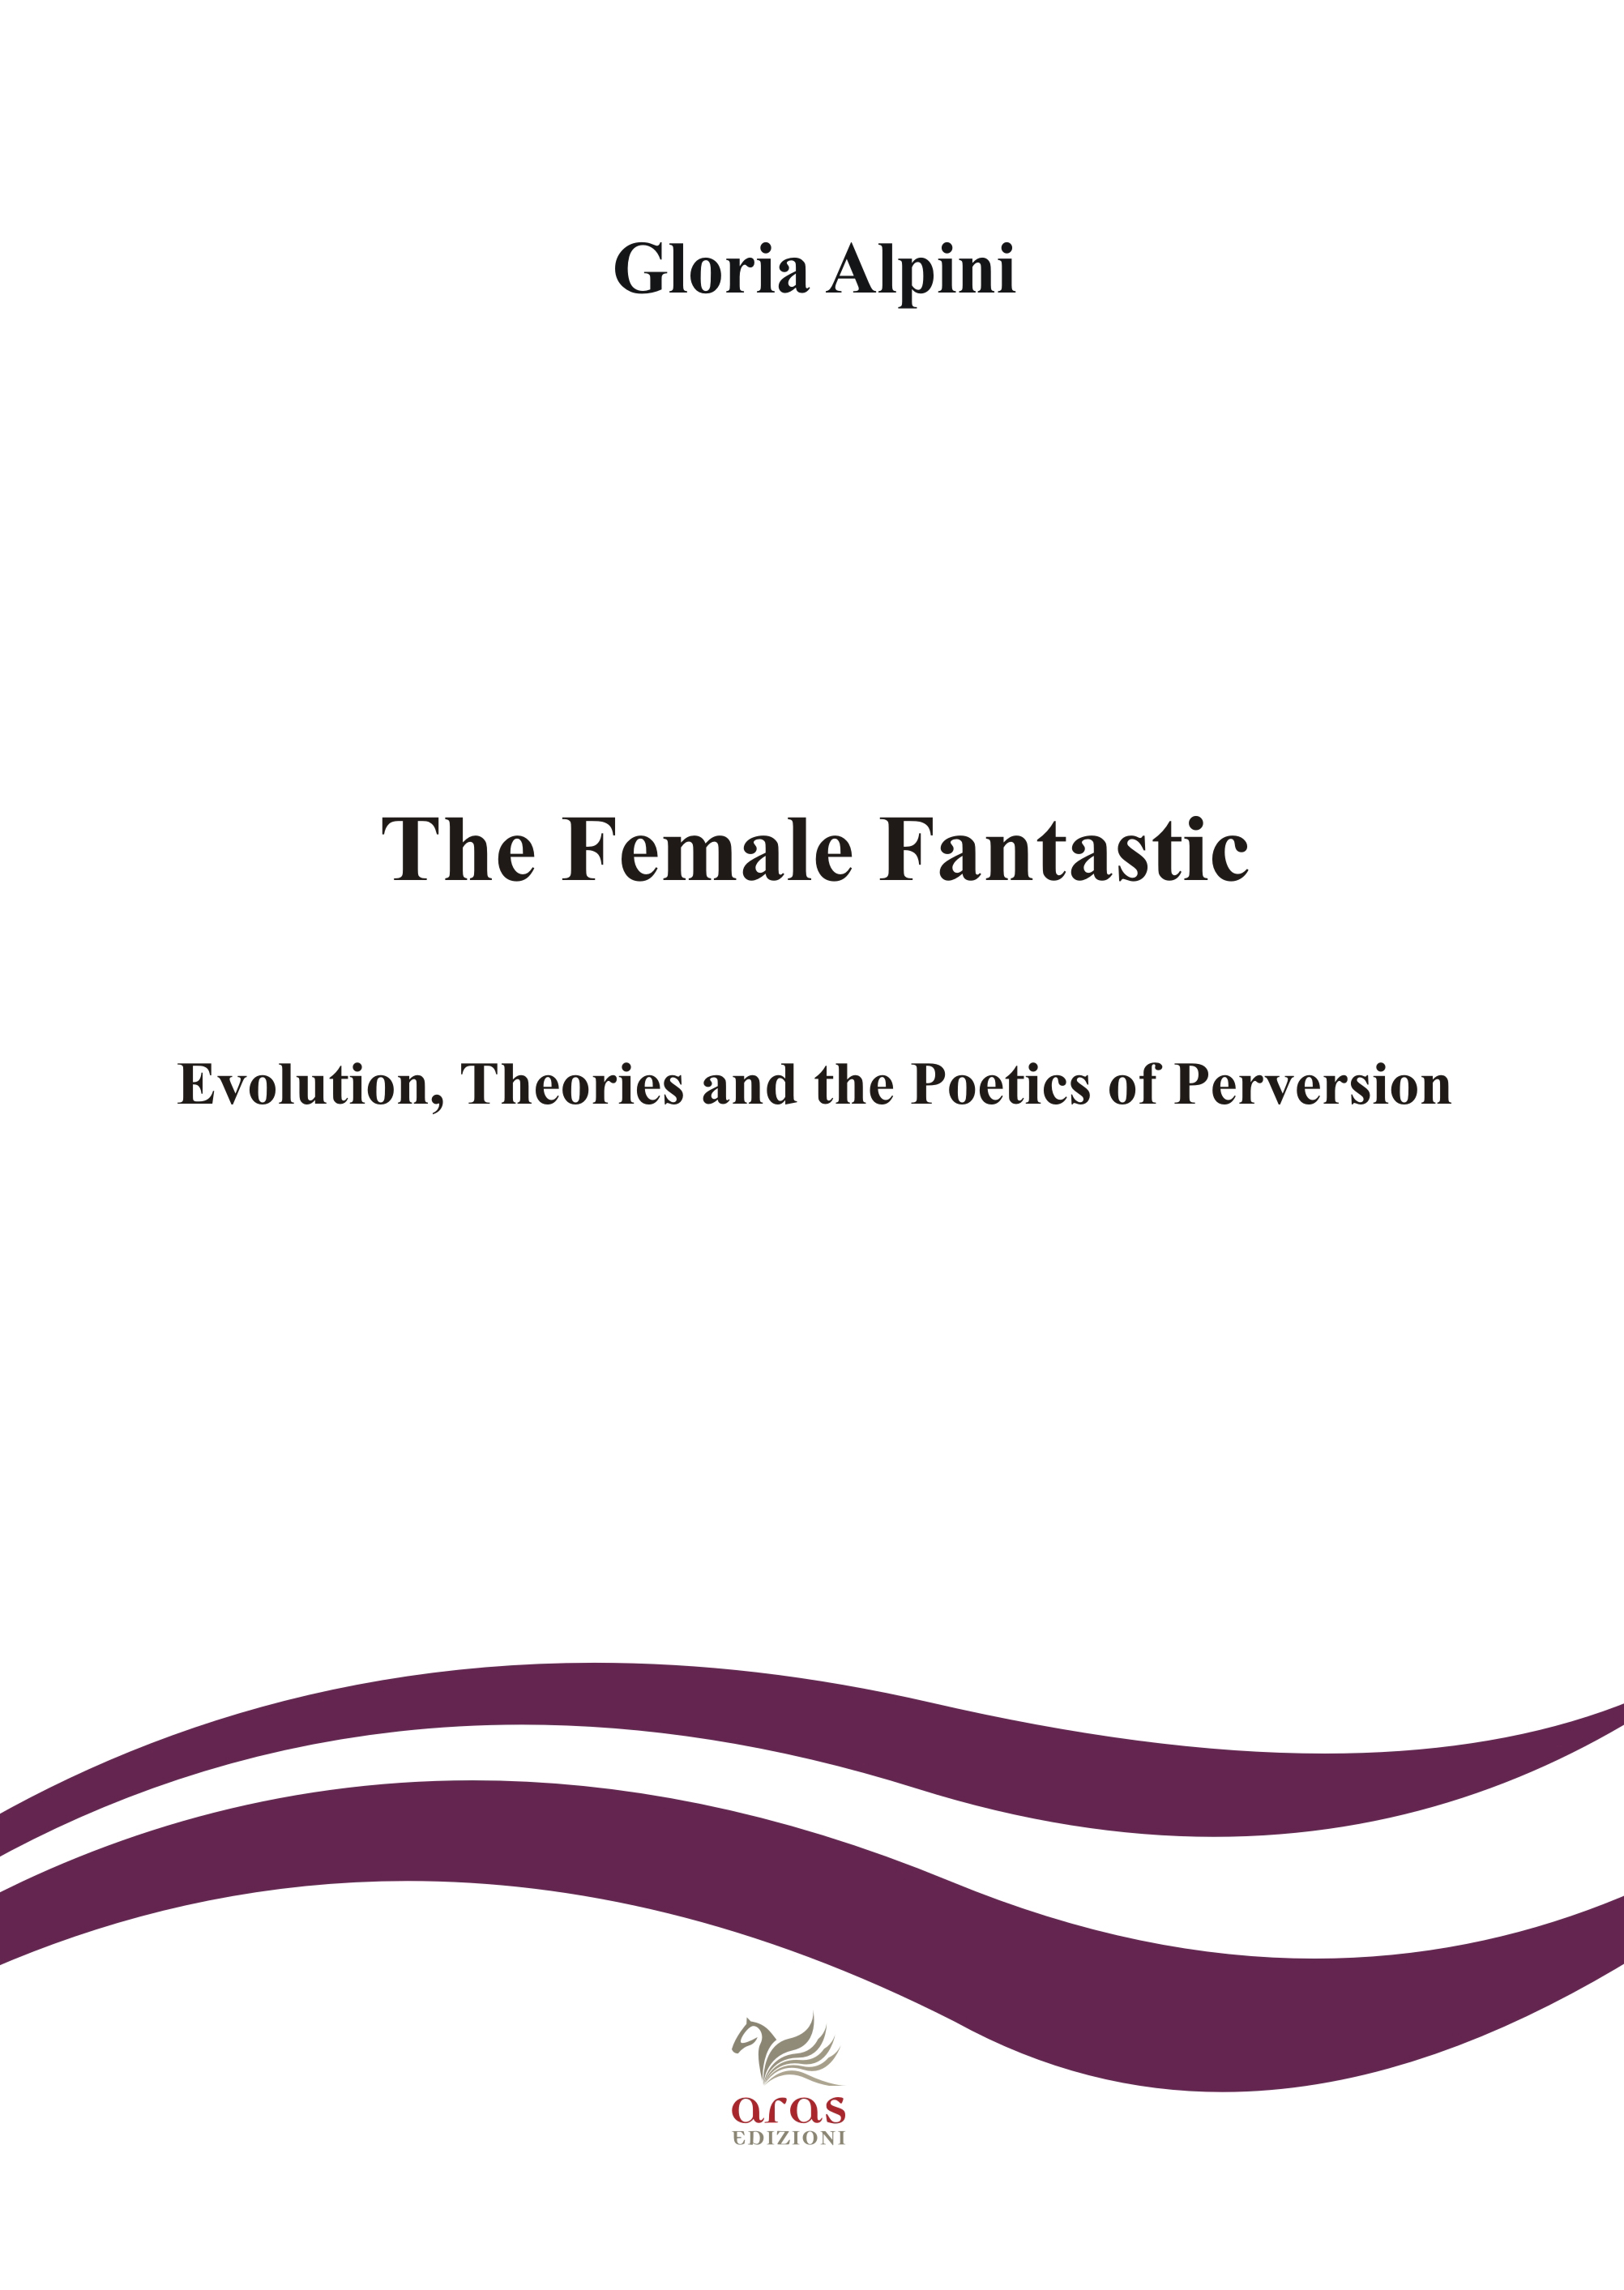 E-book, The female fantastic : evolution, theories and the poetics of perversion, Aras